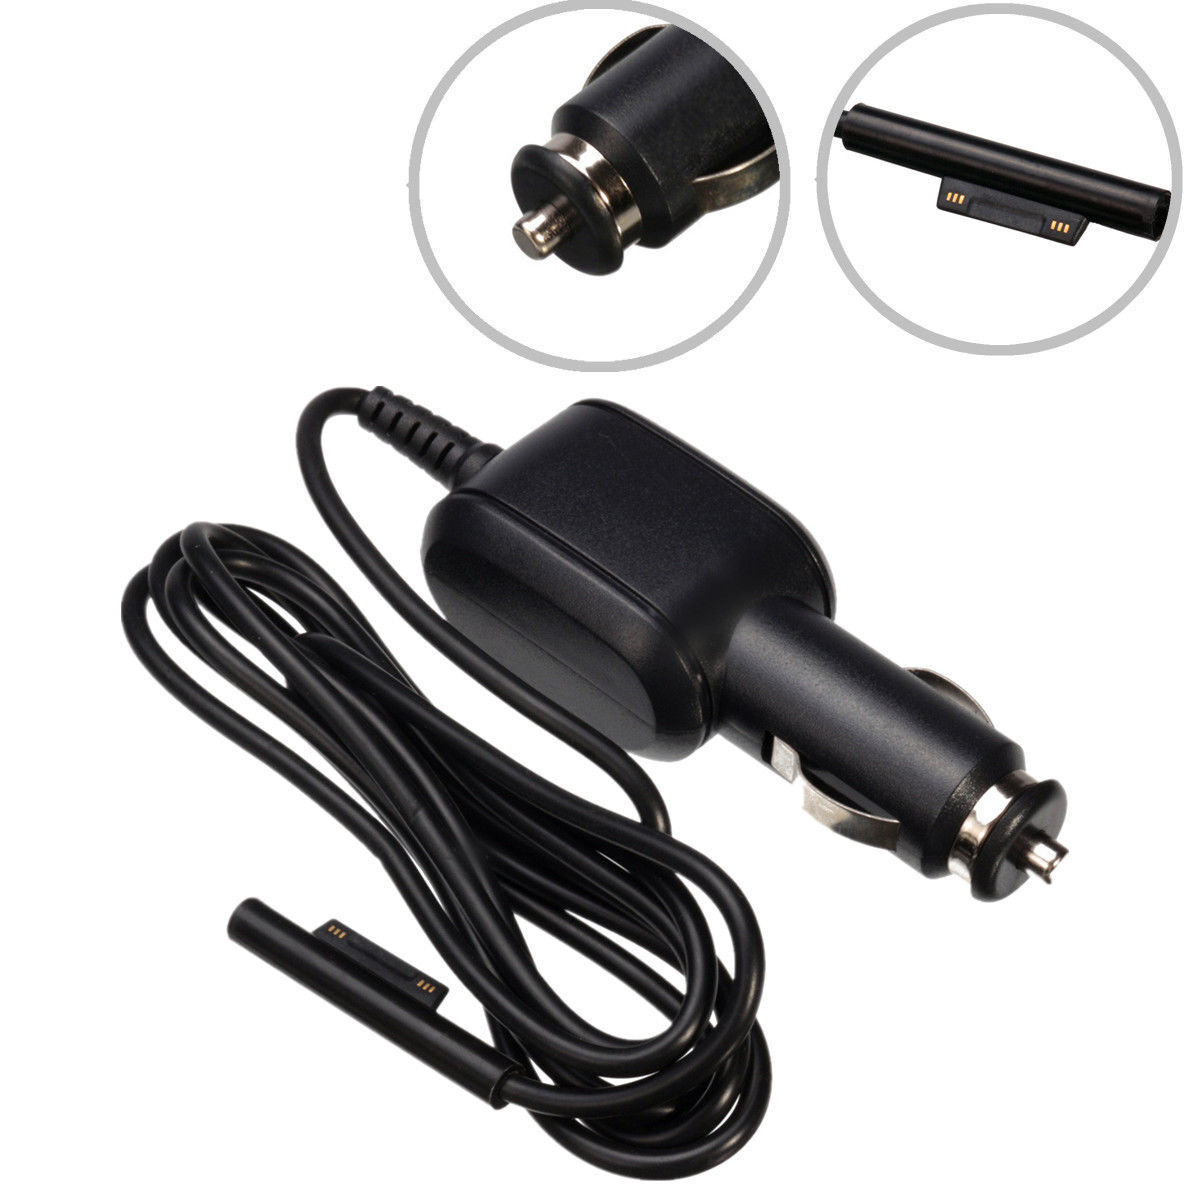 New DC 12V 2.85A Car Charger Power Adapter For Microsoft Surface Pro 3 Tablet